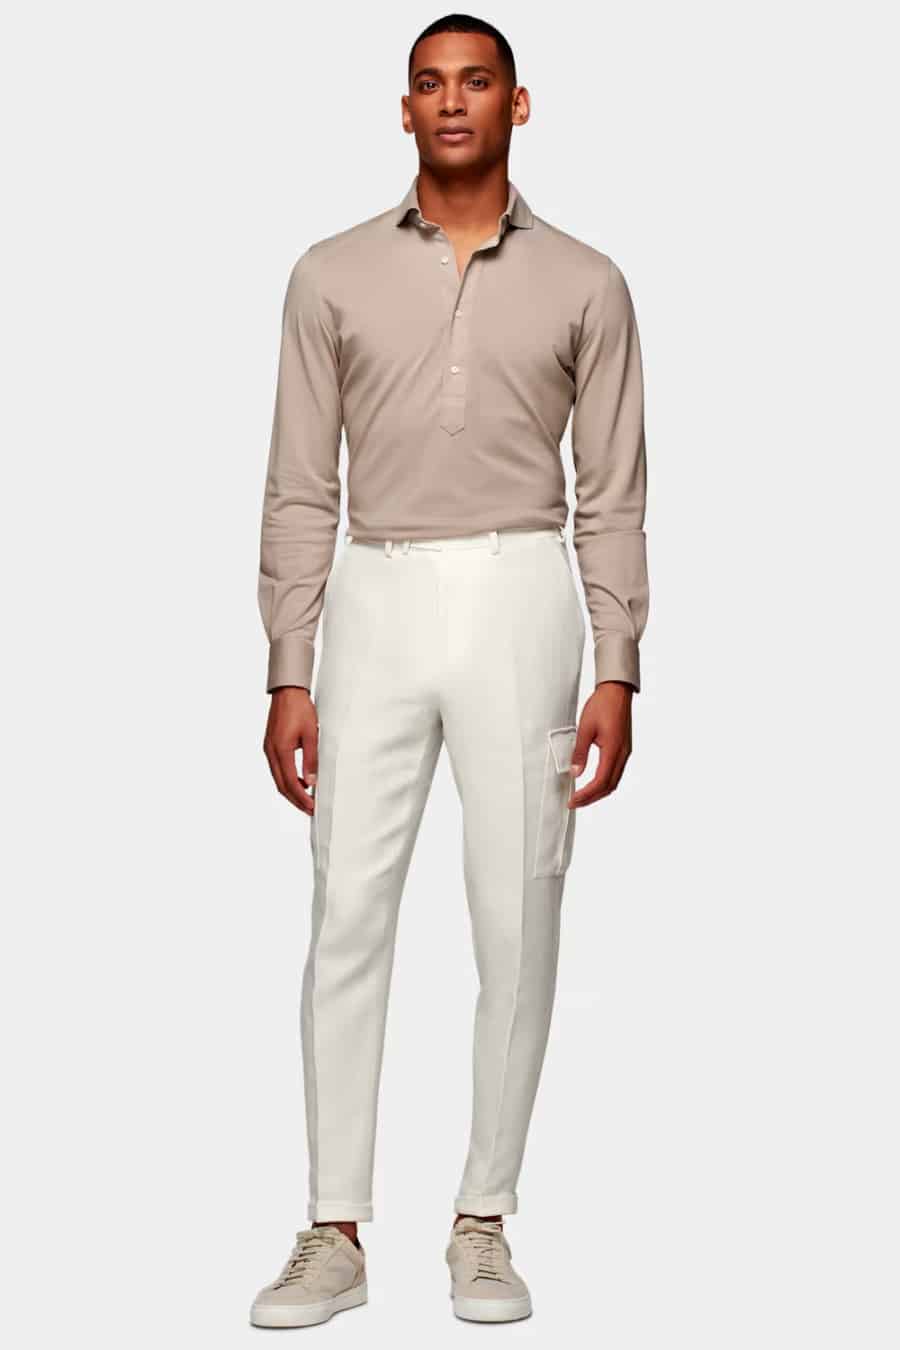 Men's white cargo pants, long-sleeved camel polo shirt and suede sneakers outfit